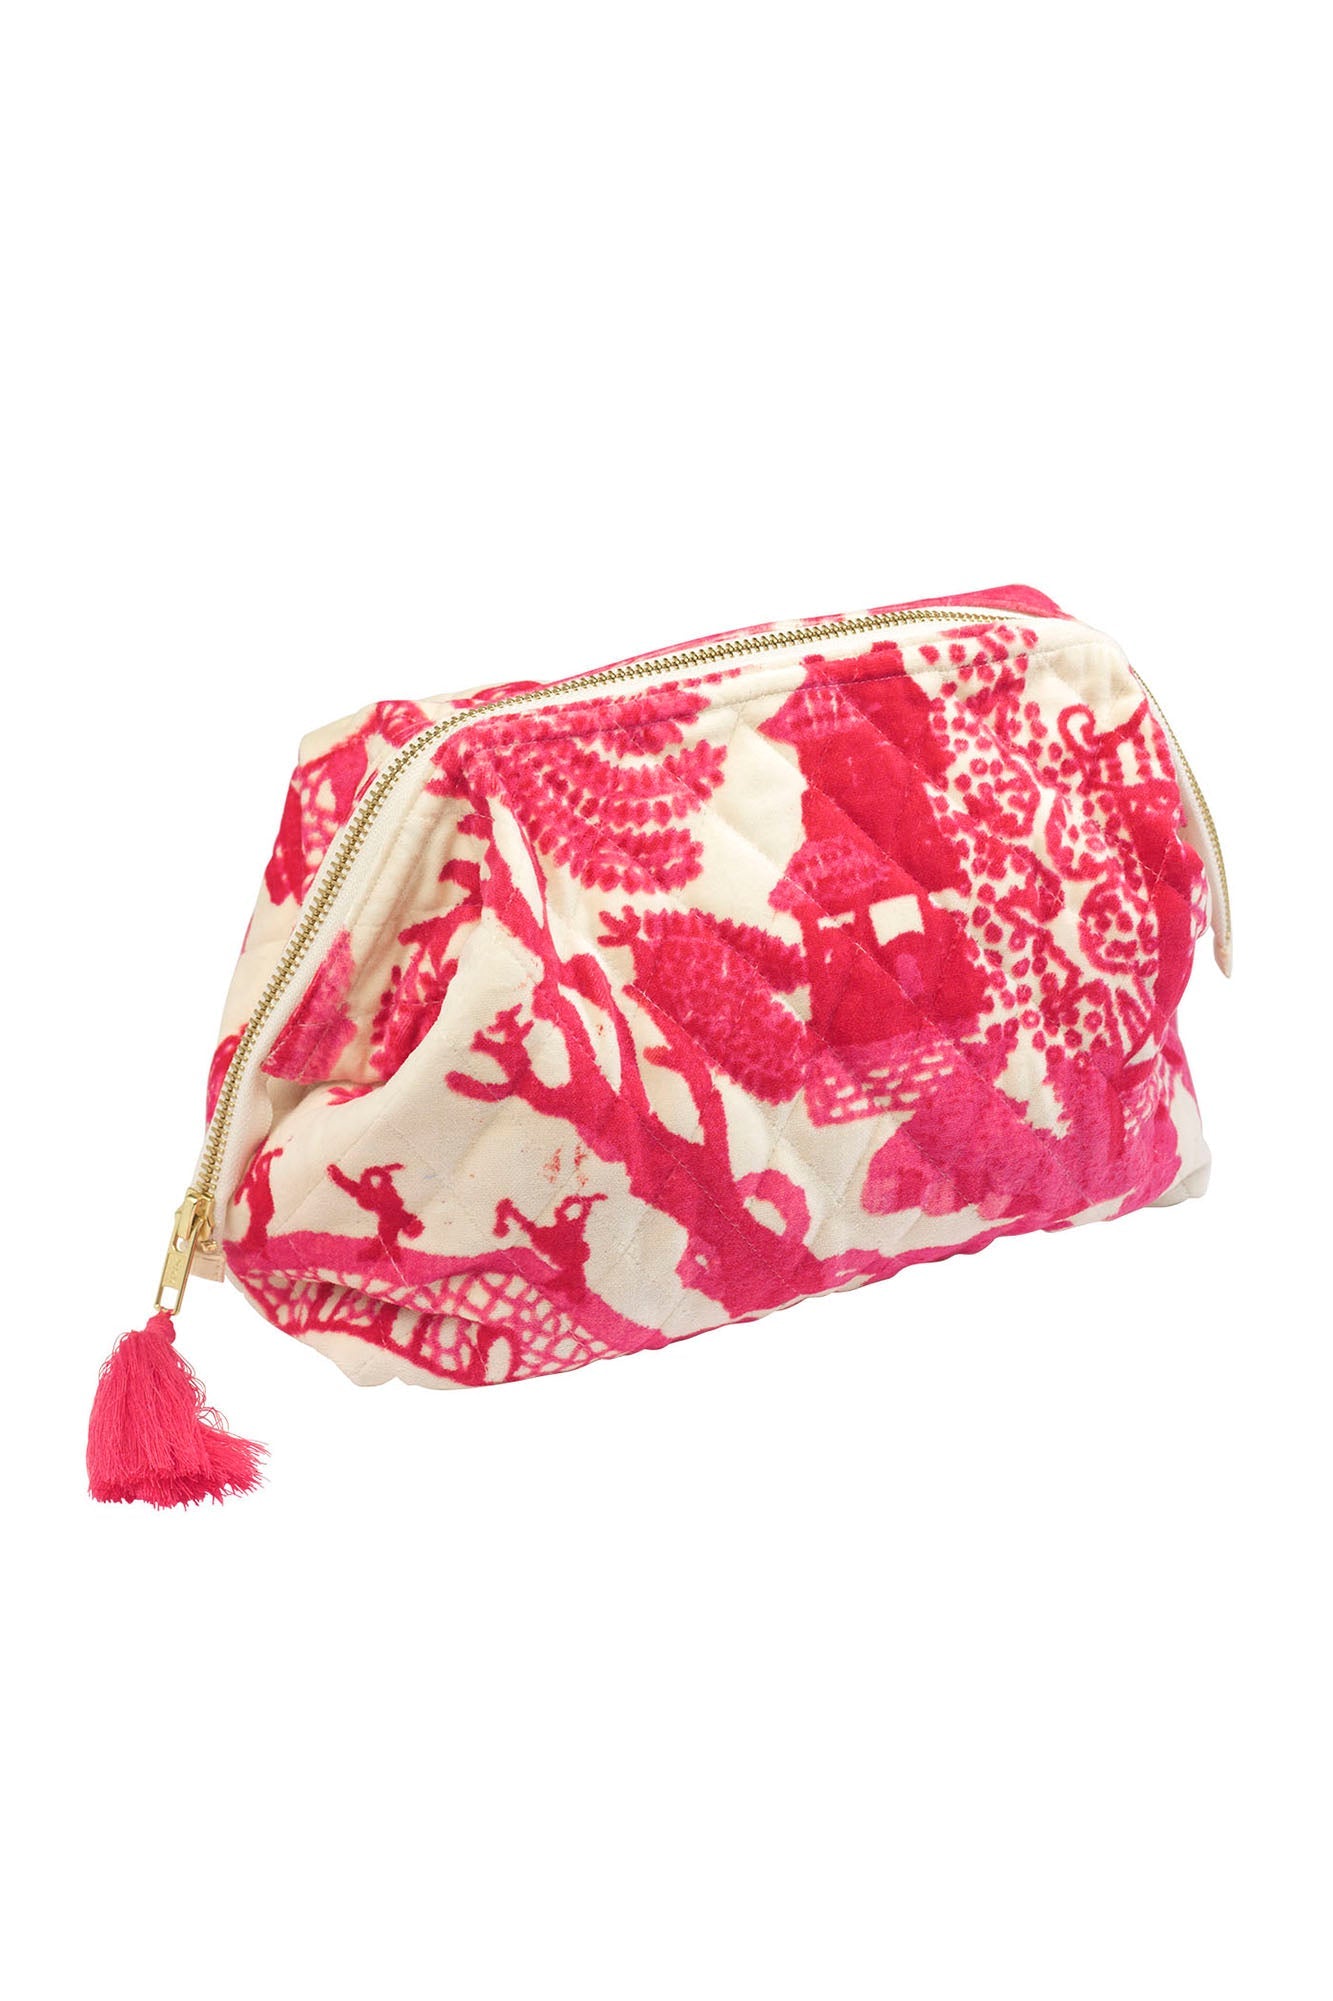 Giant Willow Pink Velvet Pouch by One Hundred Stars